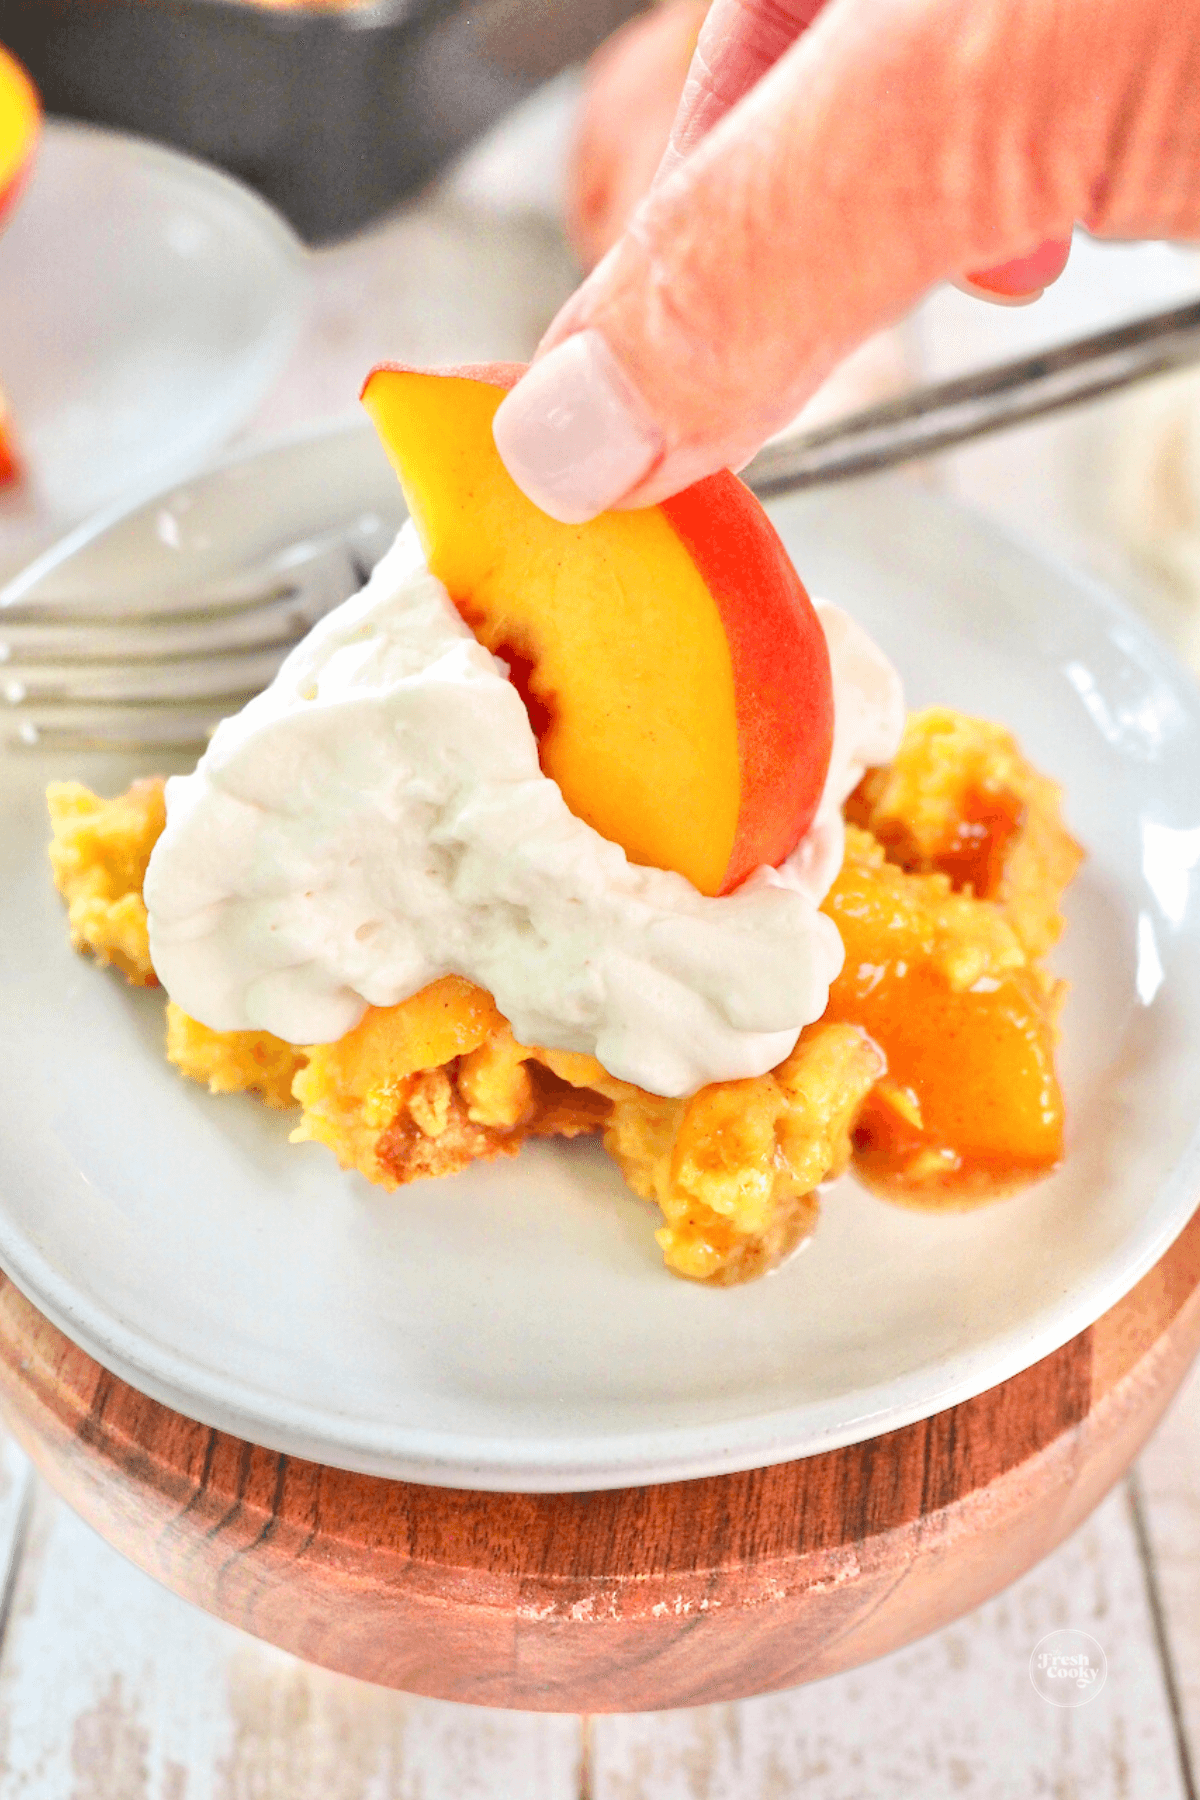 Hand adding a sliced peach to the top of serving of peach cobbler with whipped cream.